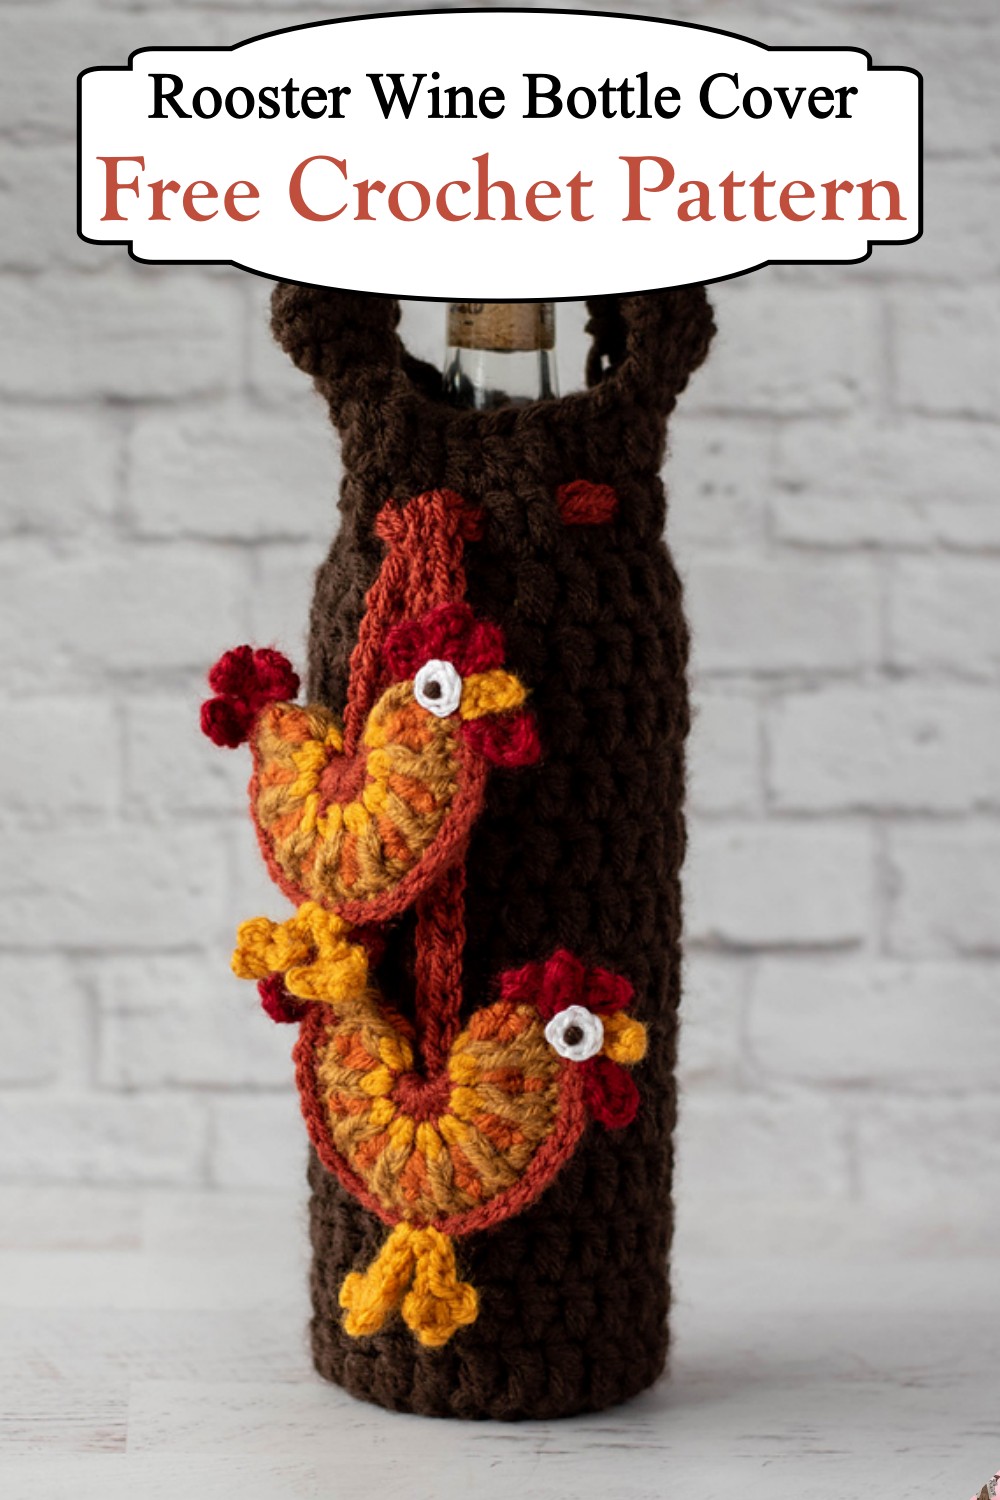 Rooster Wine Bottle Cover